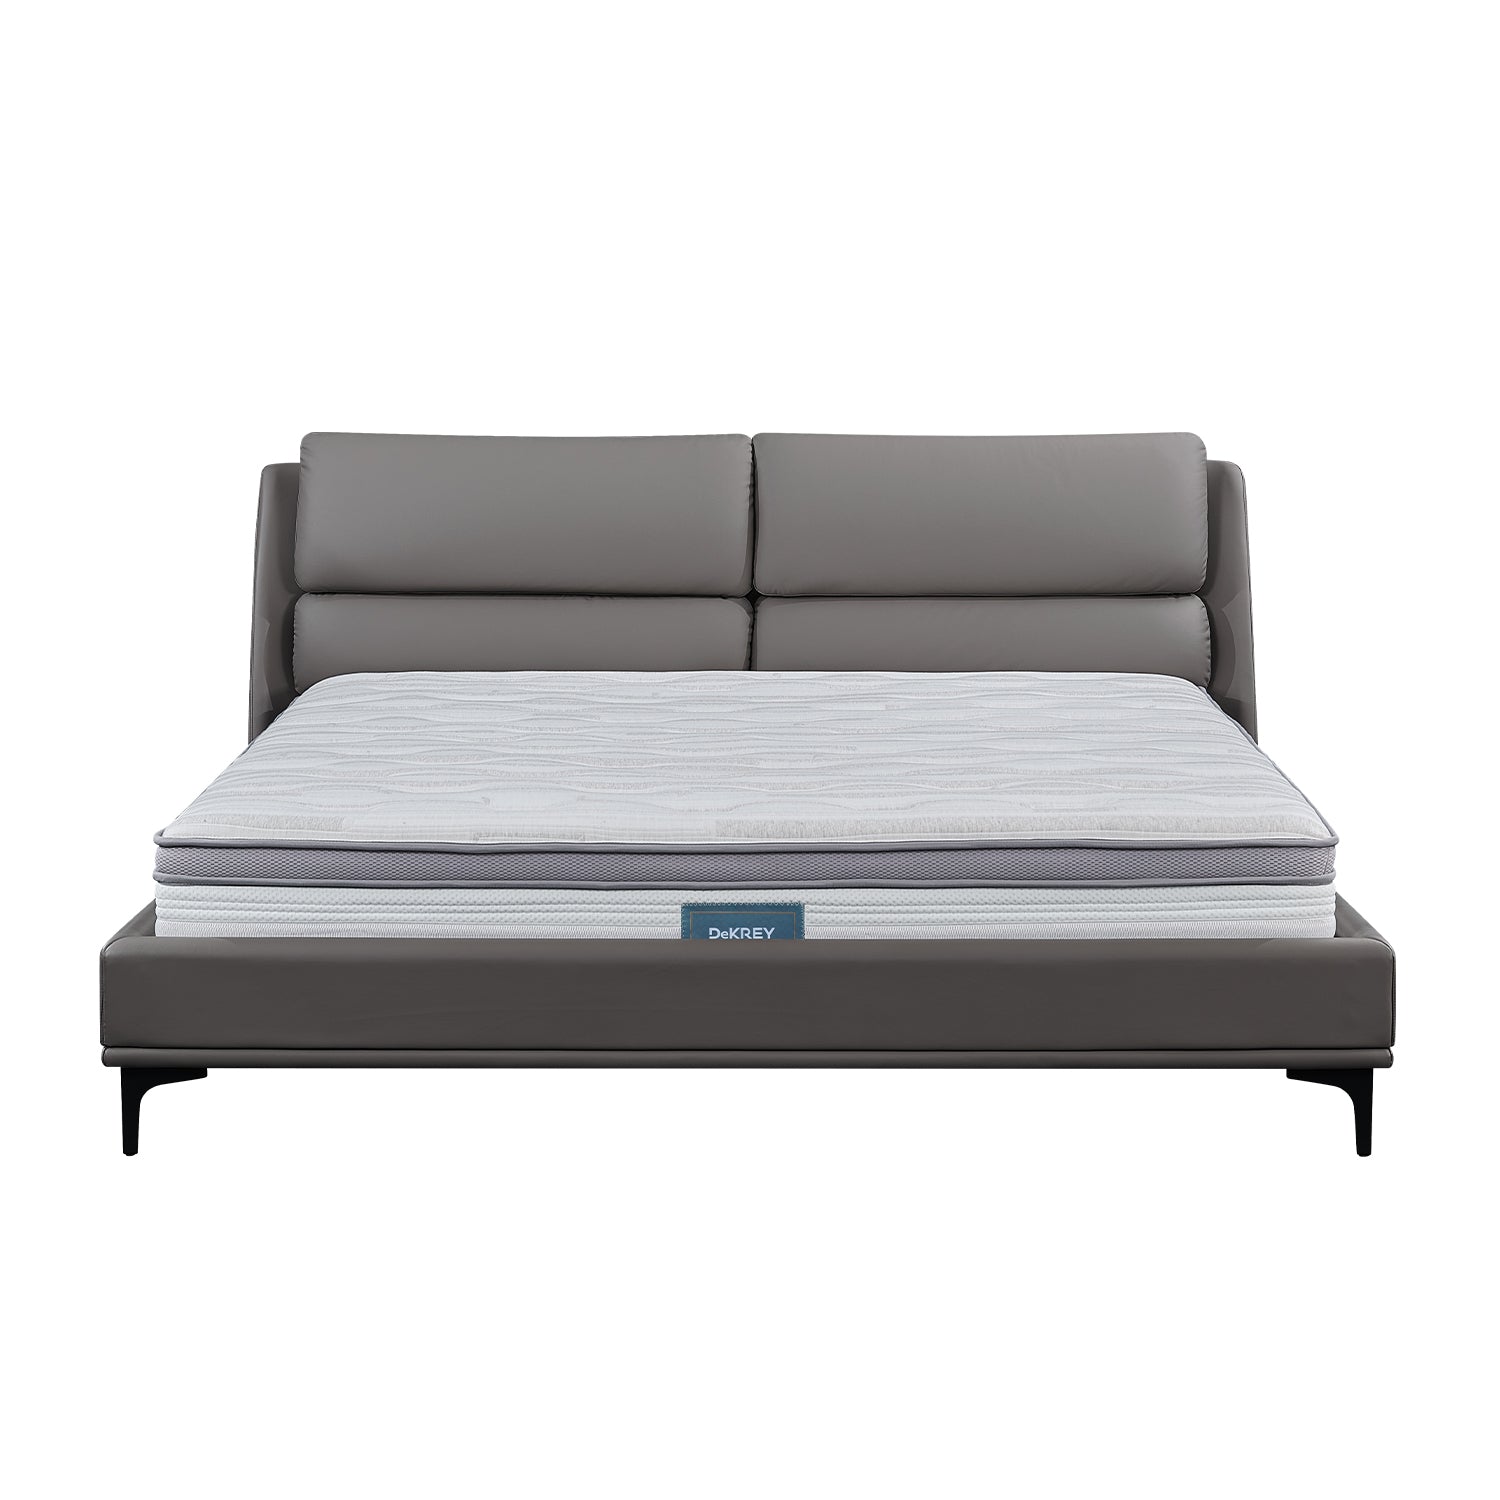 Gray leather bed frame with high padded headboard and white mattress